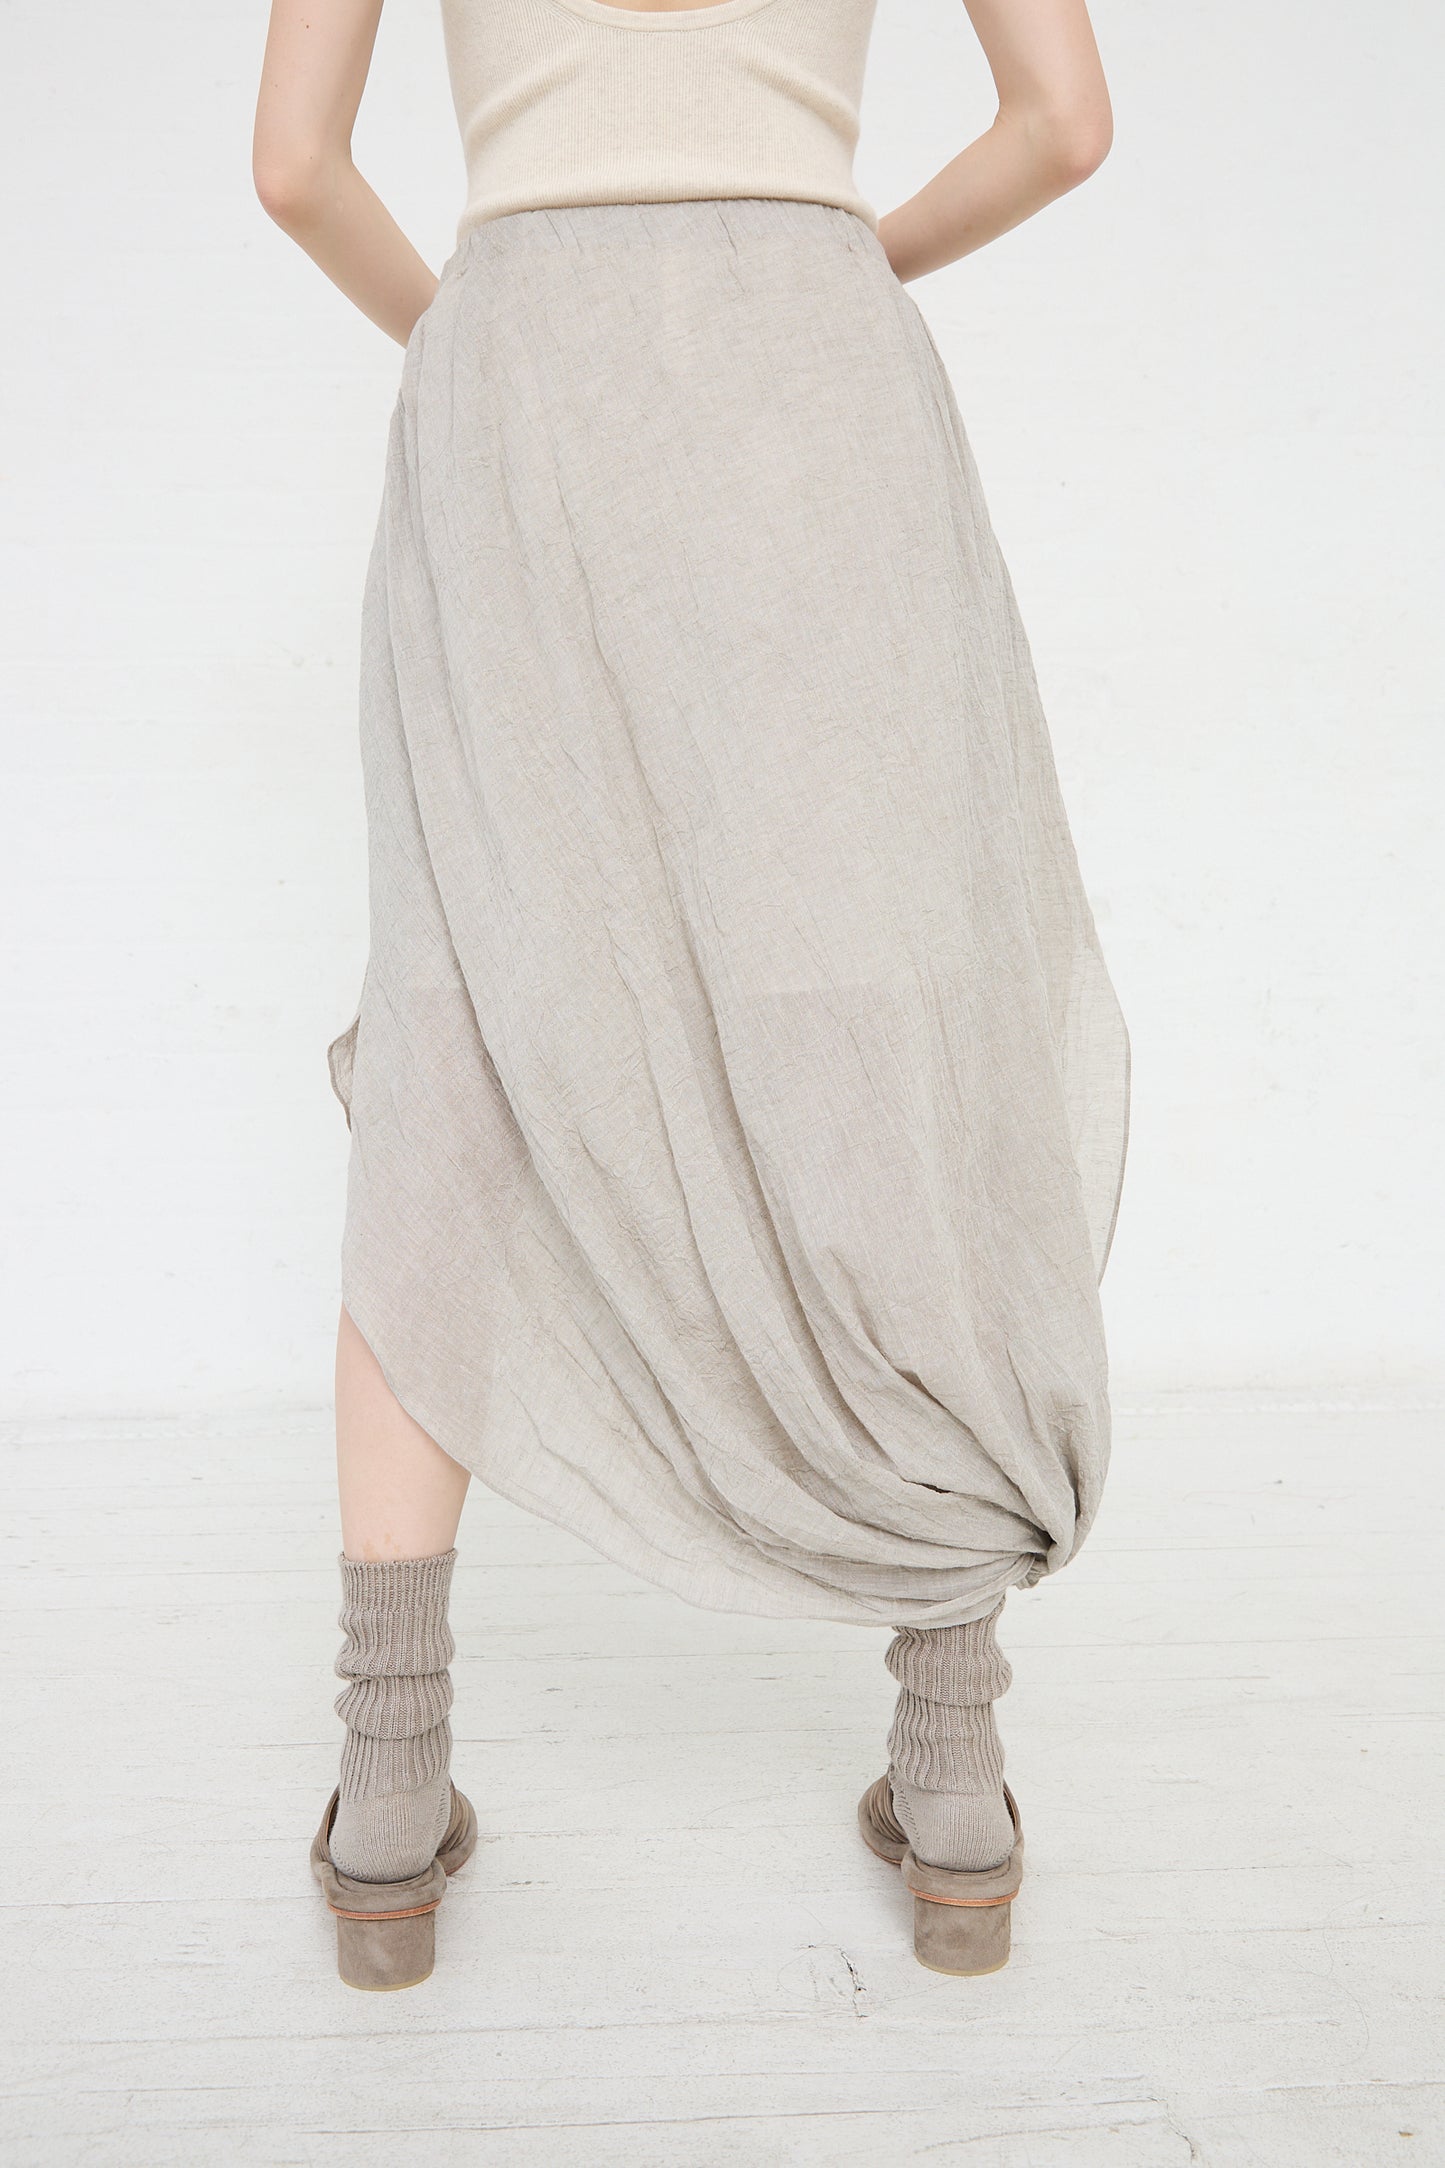 Woman viewed from behind wearing a draped beige cotton/linen blend Gauze Twist Skirt in Ash by Lauren Manoogian, grey socks, and brown clogs against a white background.